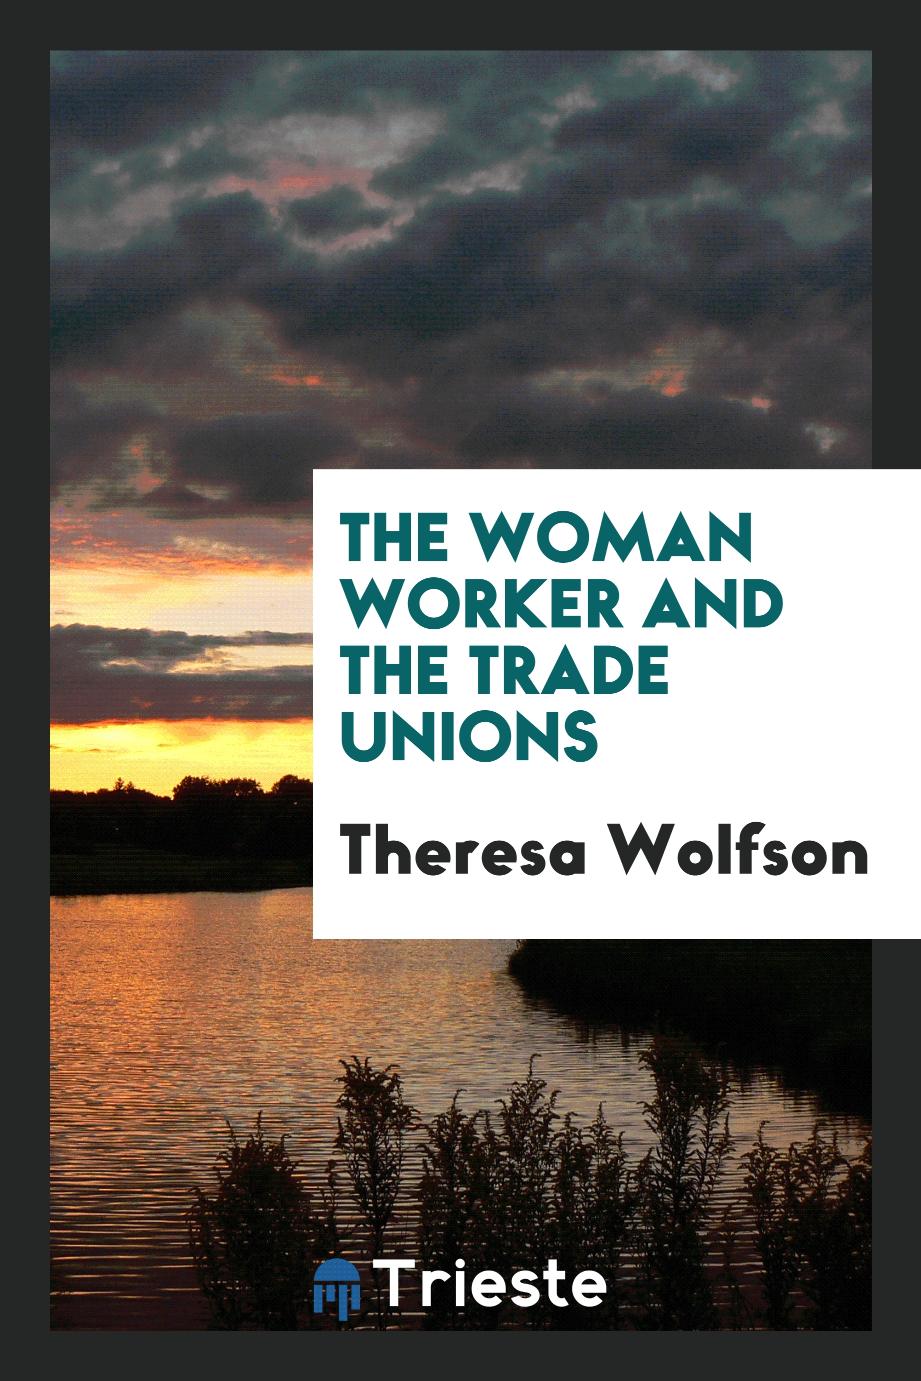 The woman worker and the trade unions